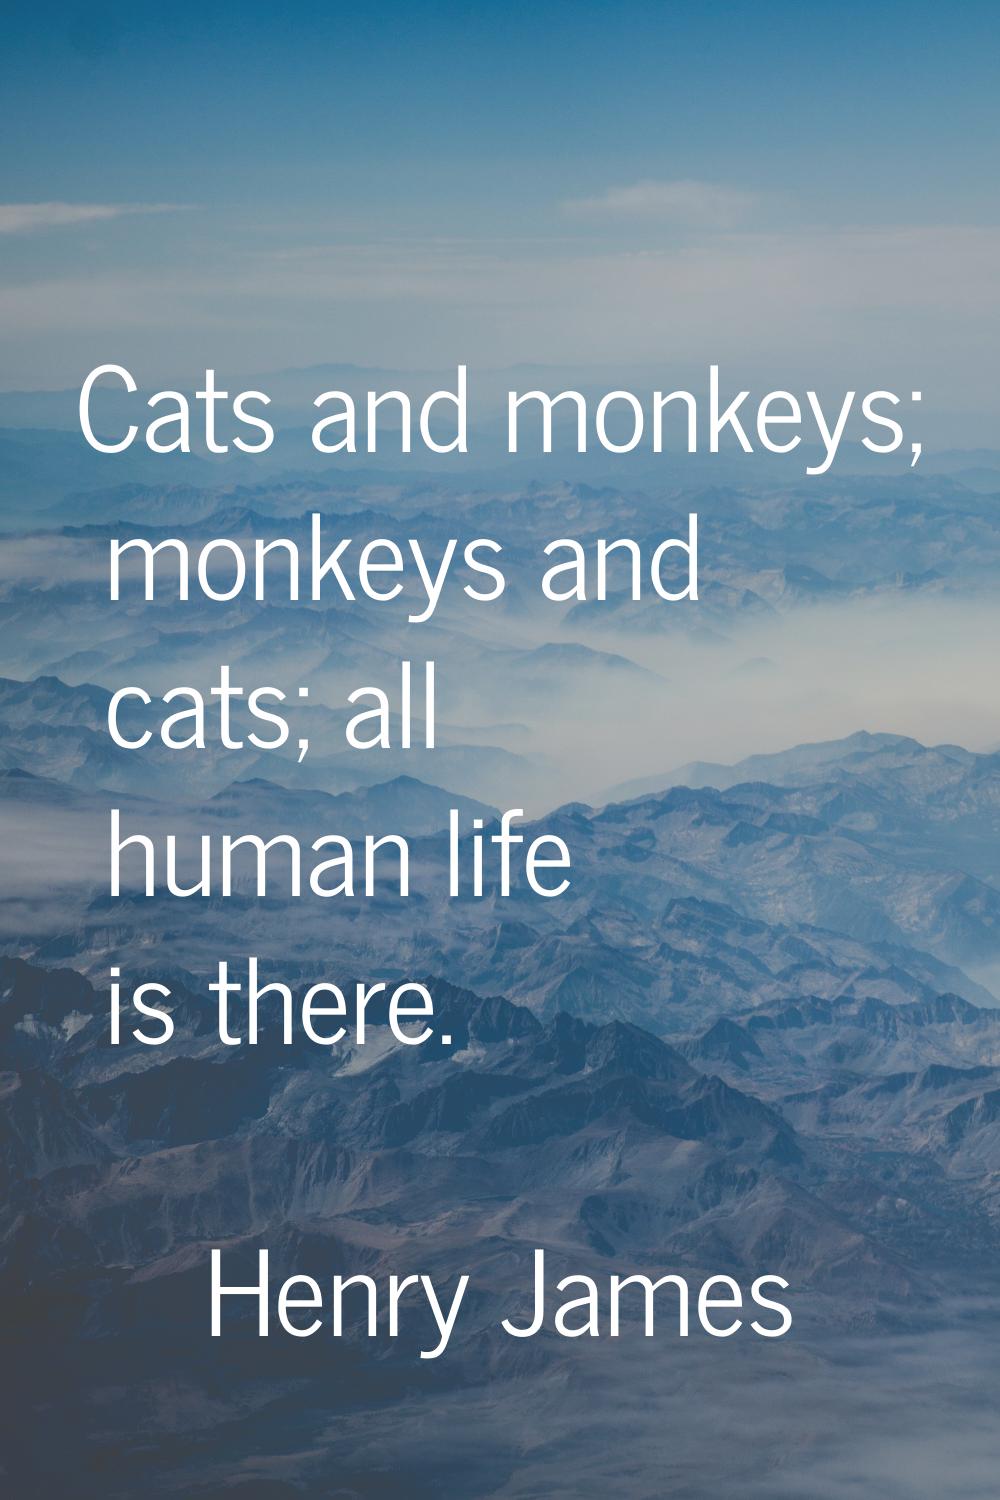 Cats and monkeys; monkeys and cats; all human life is there.